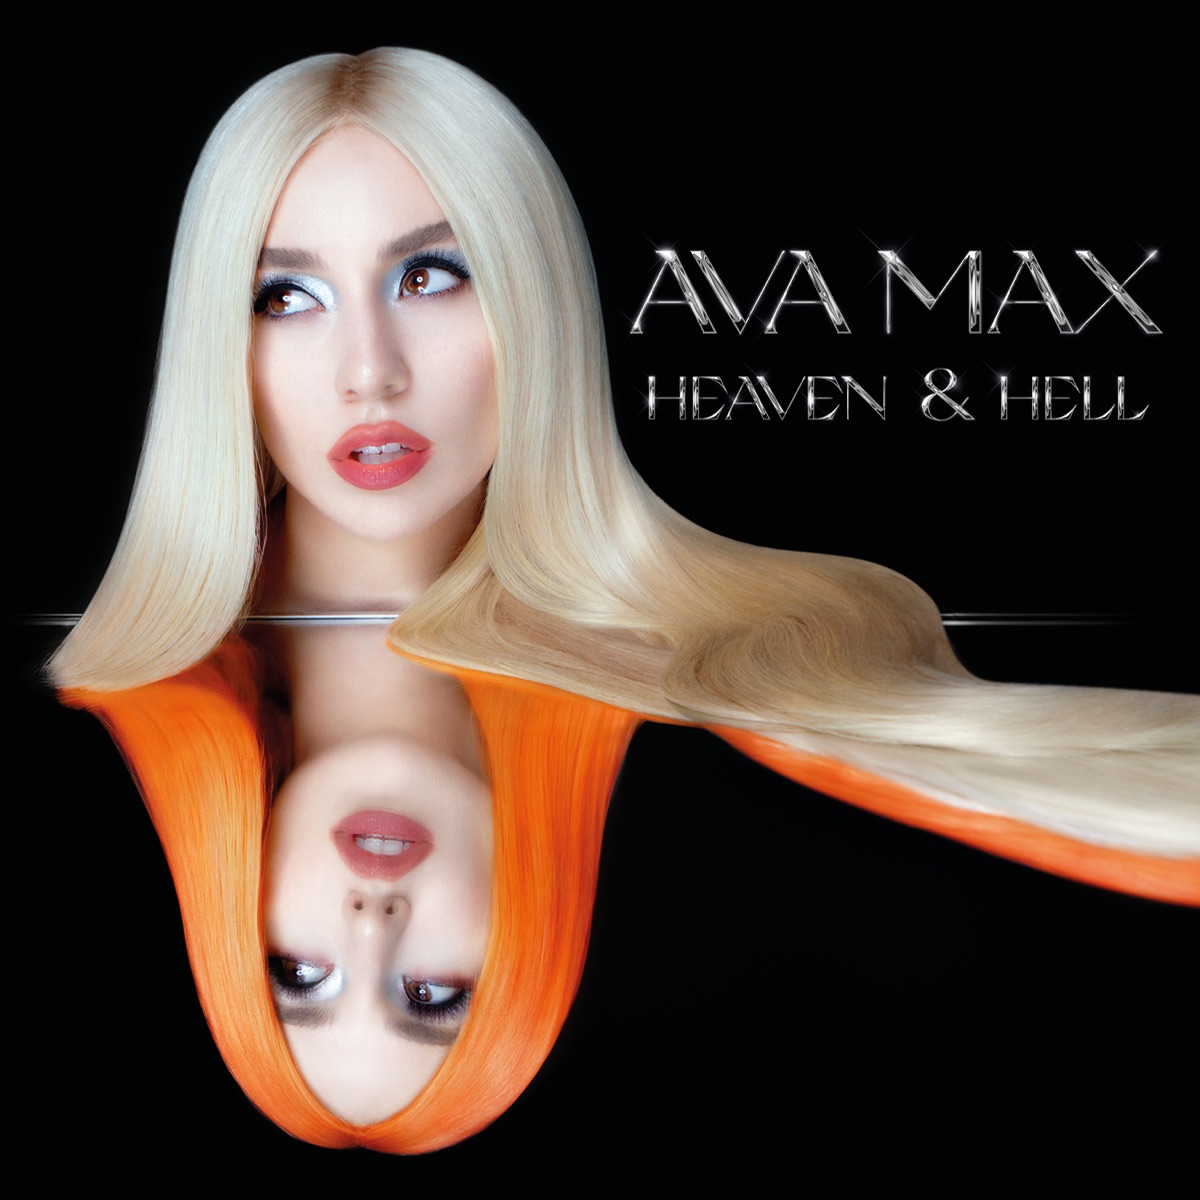 ultratop.be - Ava Max - Heaven & Hell